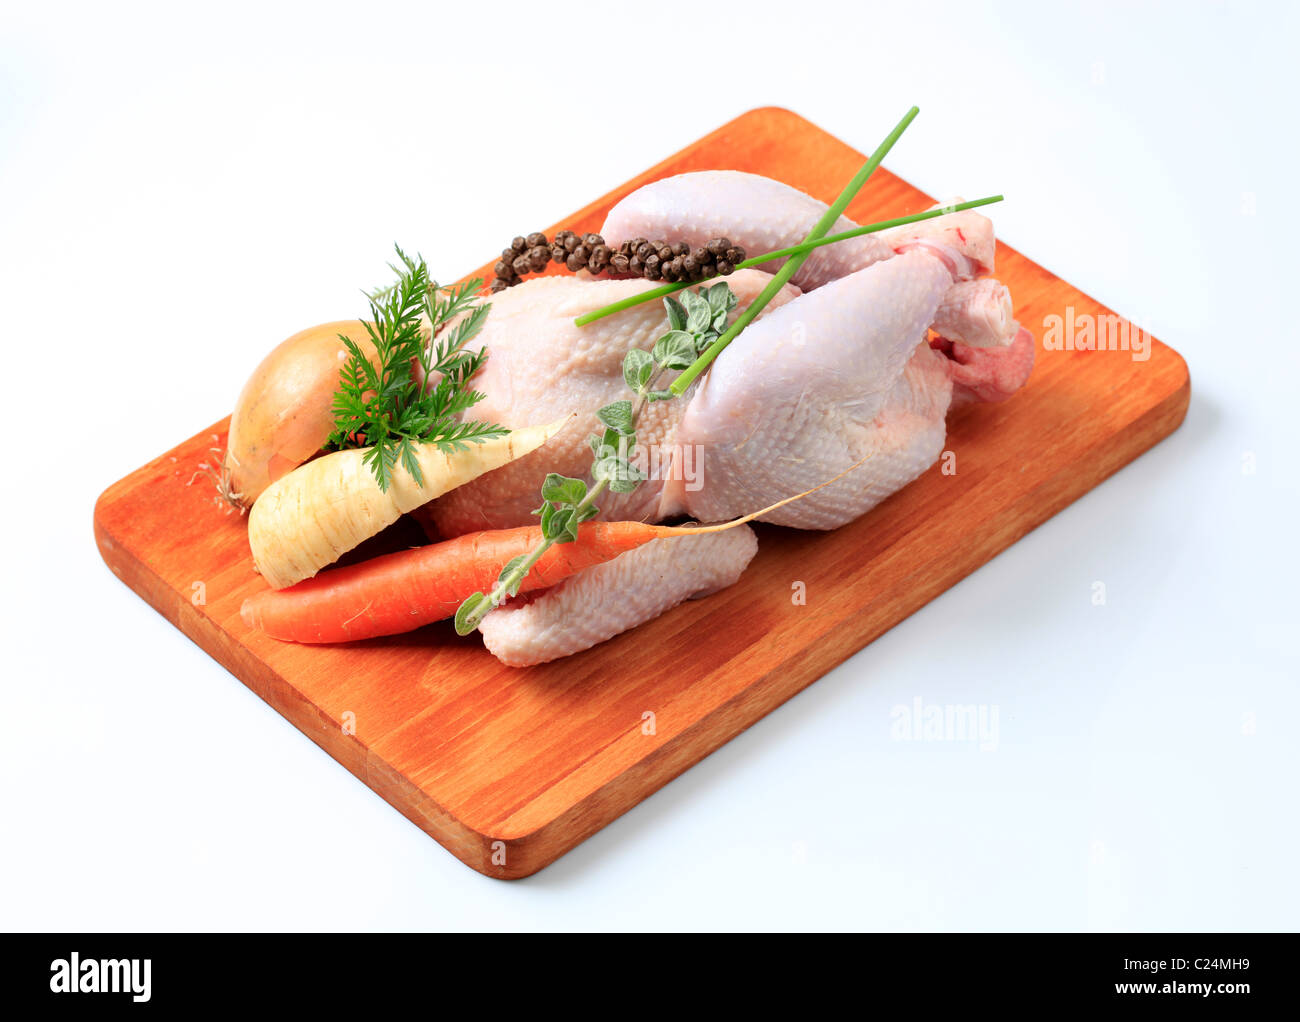 Raw chicken and vegetables on a cutting board Stock Photo - Alamy